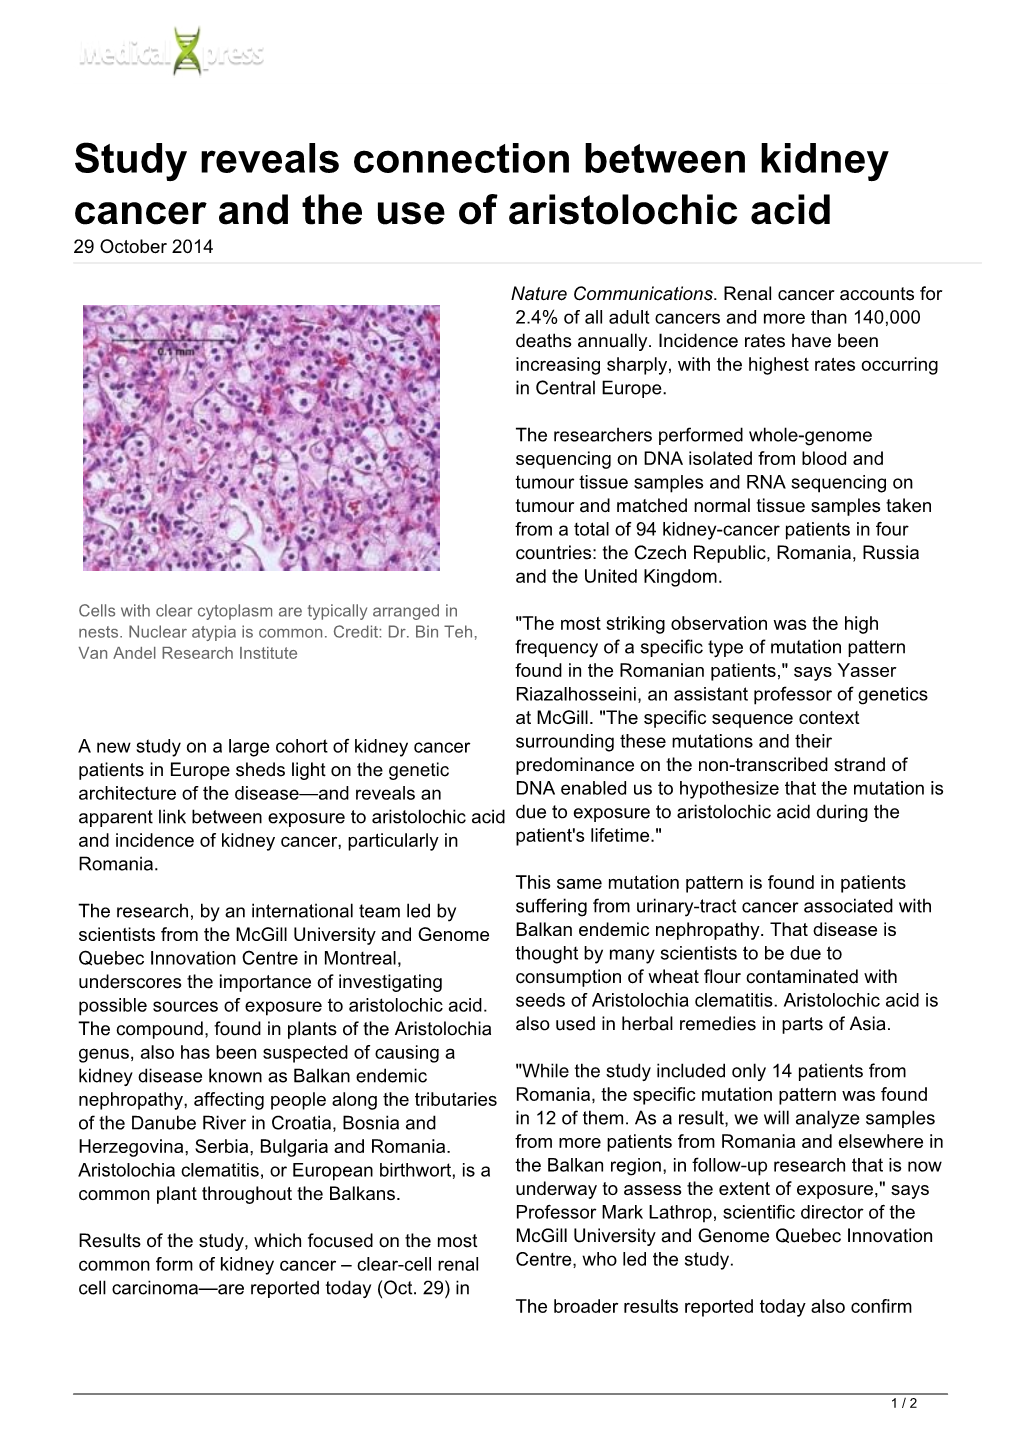 Study Reveals Connection Between Kidney Cancer and the Use of Aristolochic Acid 29 October 2014